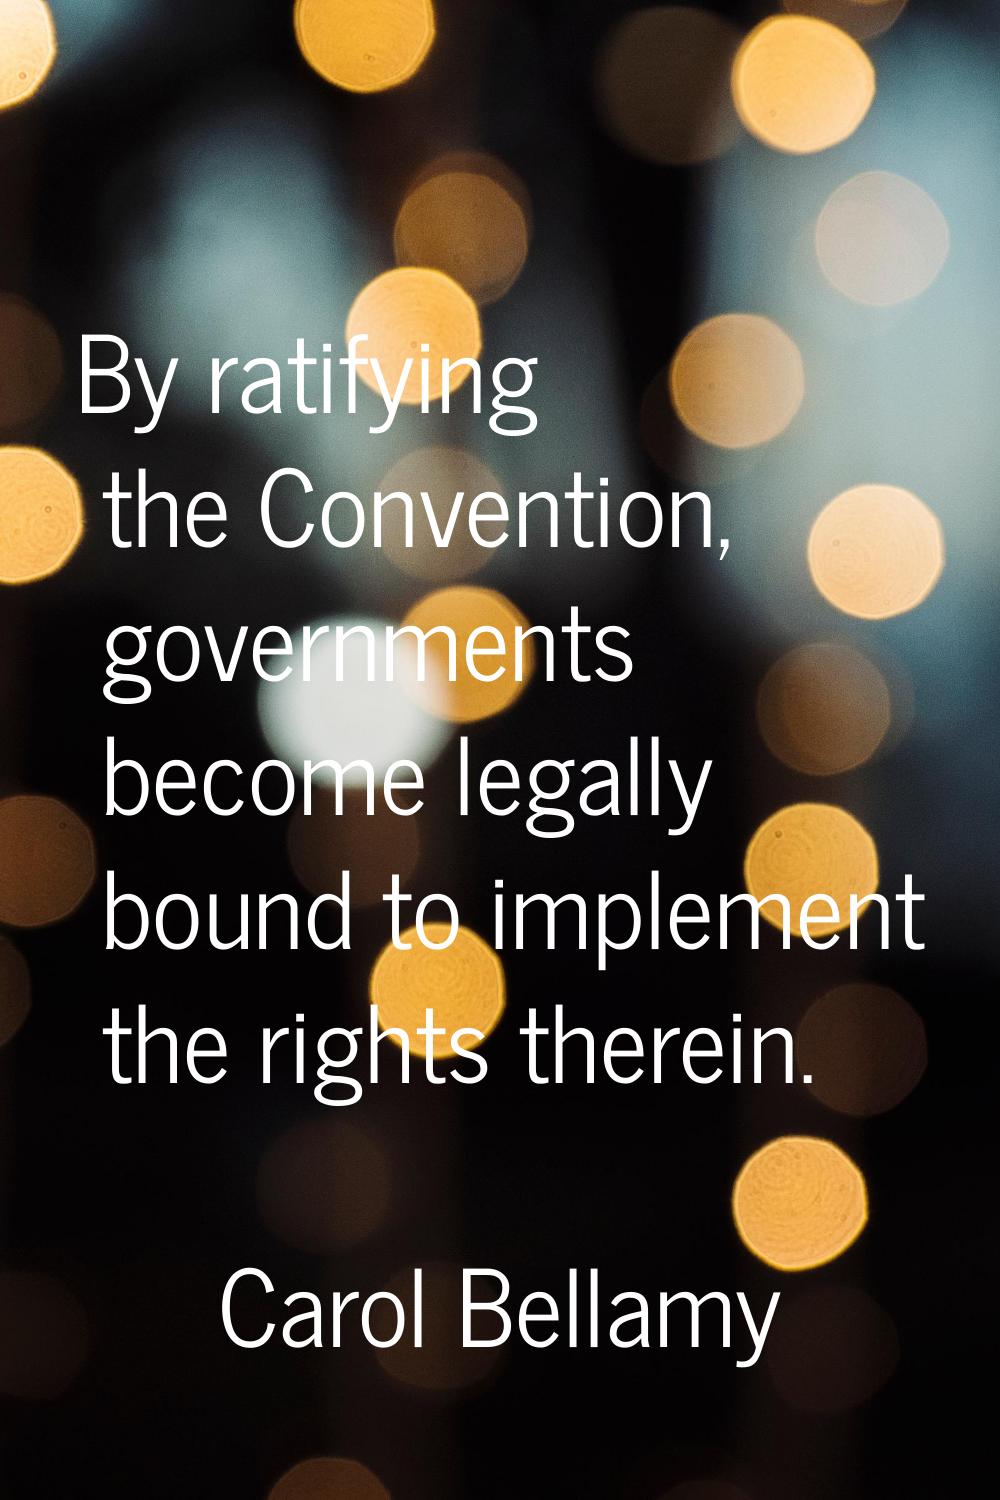 By ratifying the Convention, governments become legally bound to implement the rights therein.